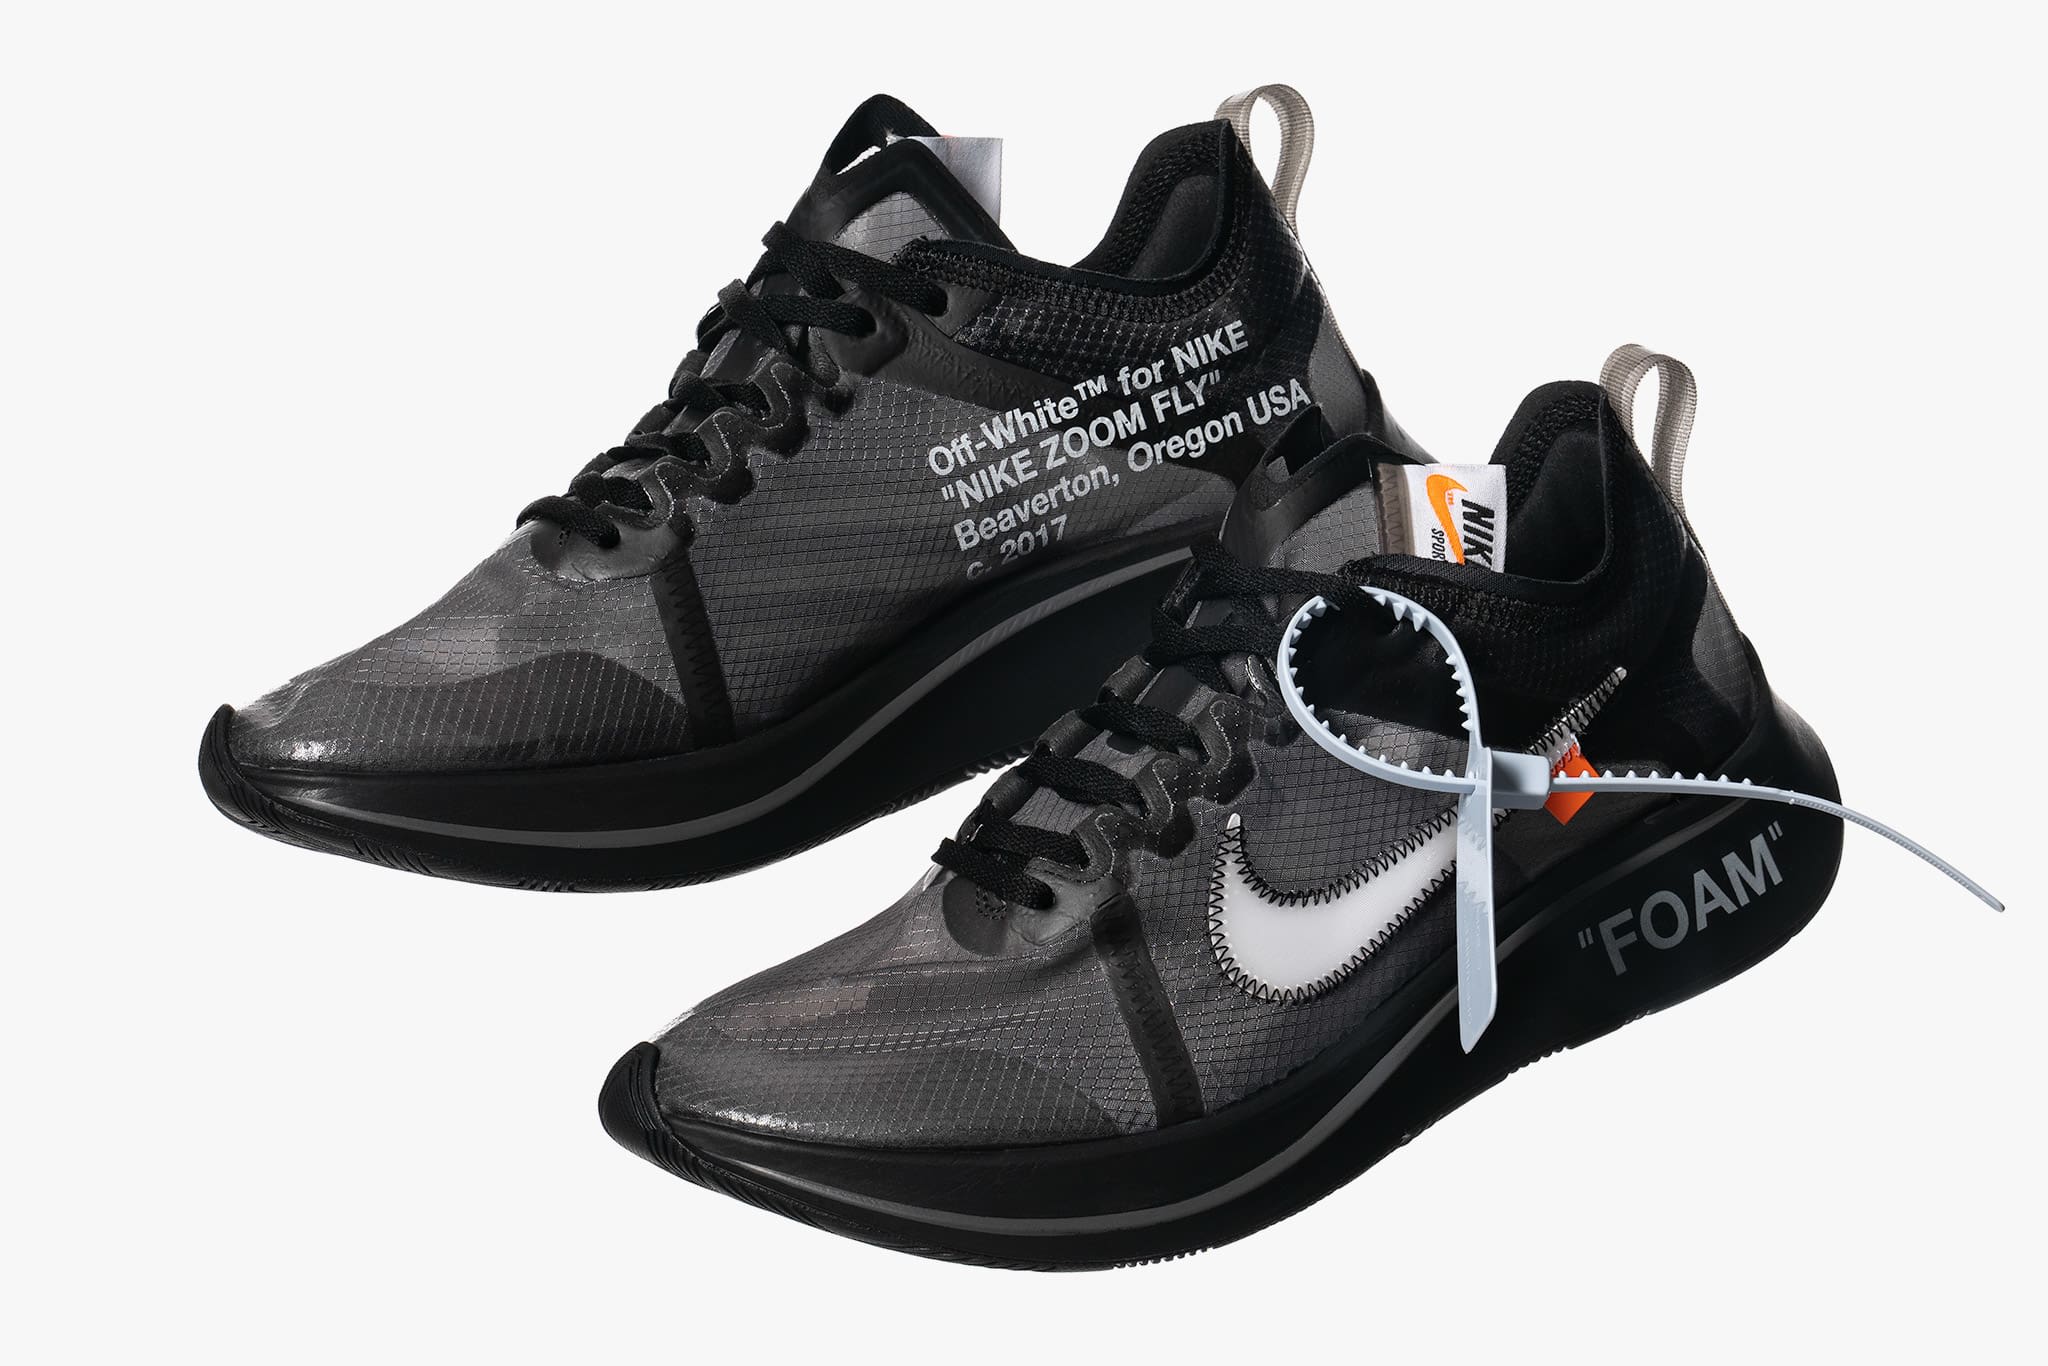 Nike x Off White The Ten Zoom Fly Black | Release Date: 12.14.18